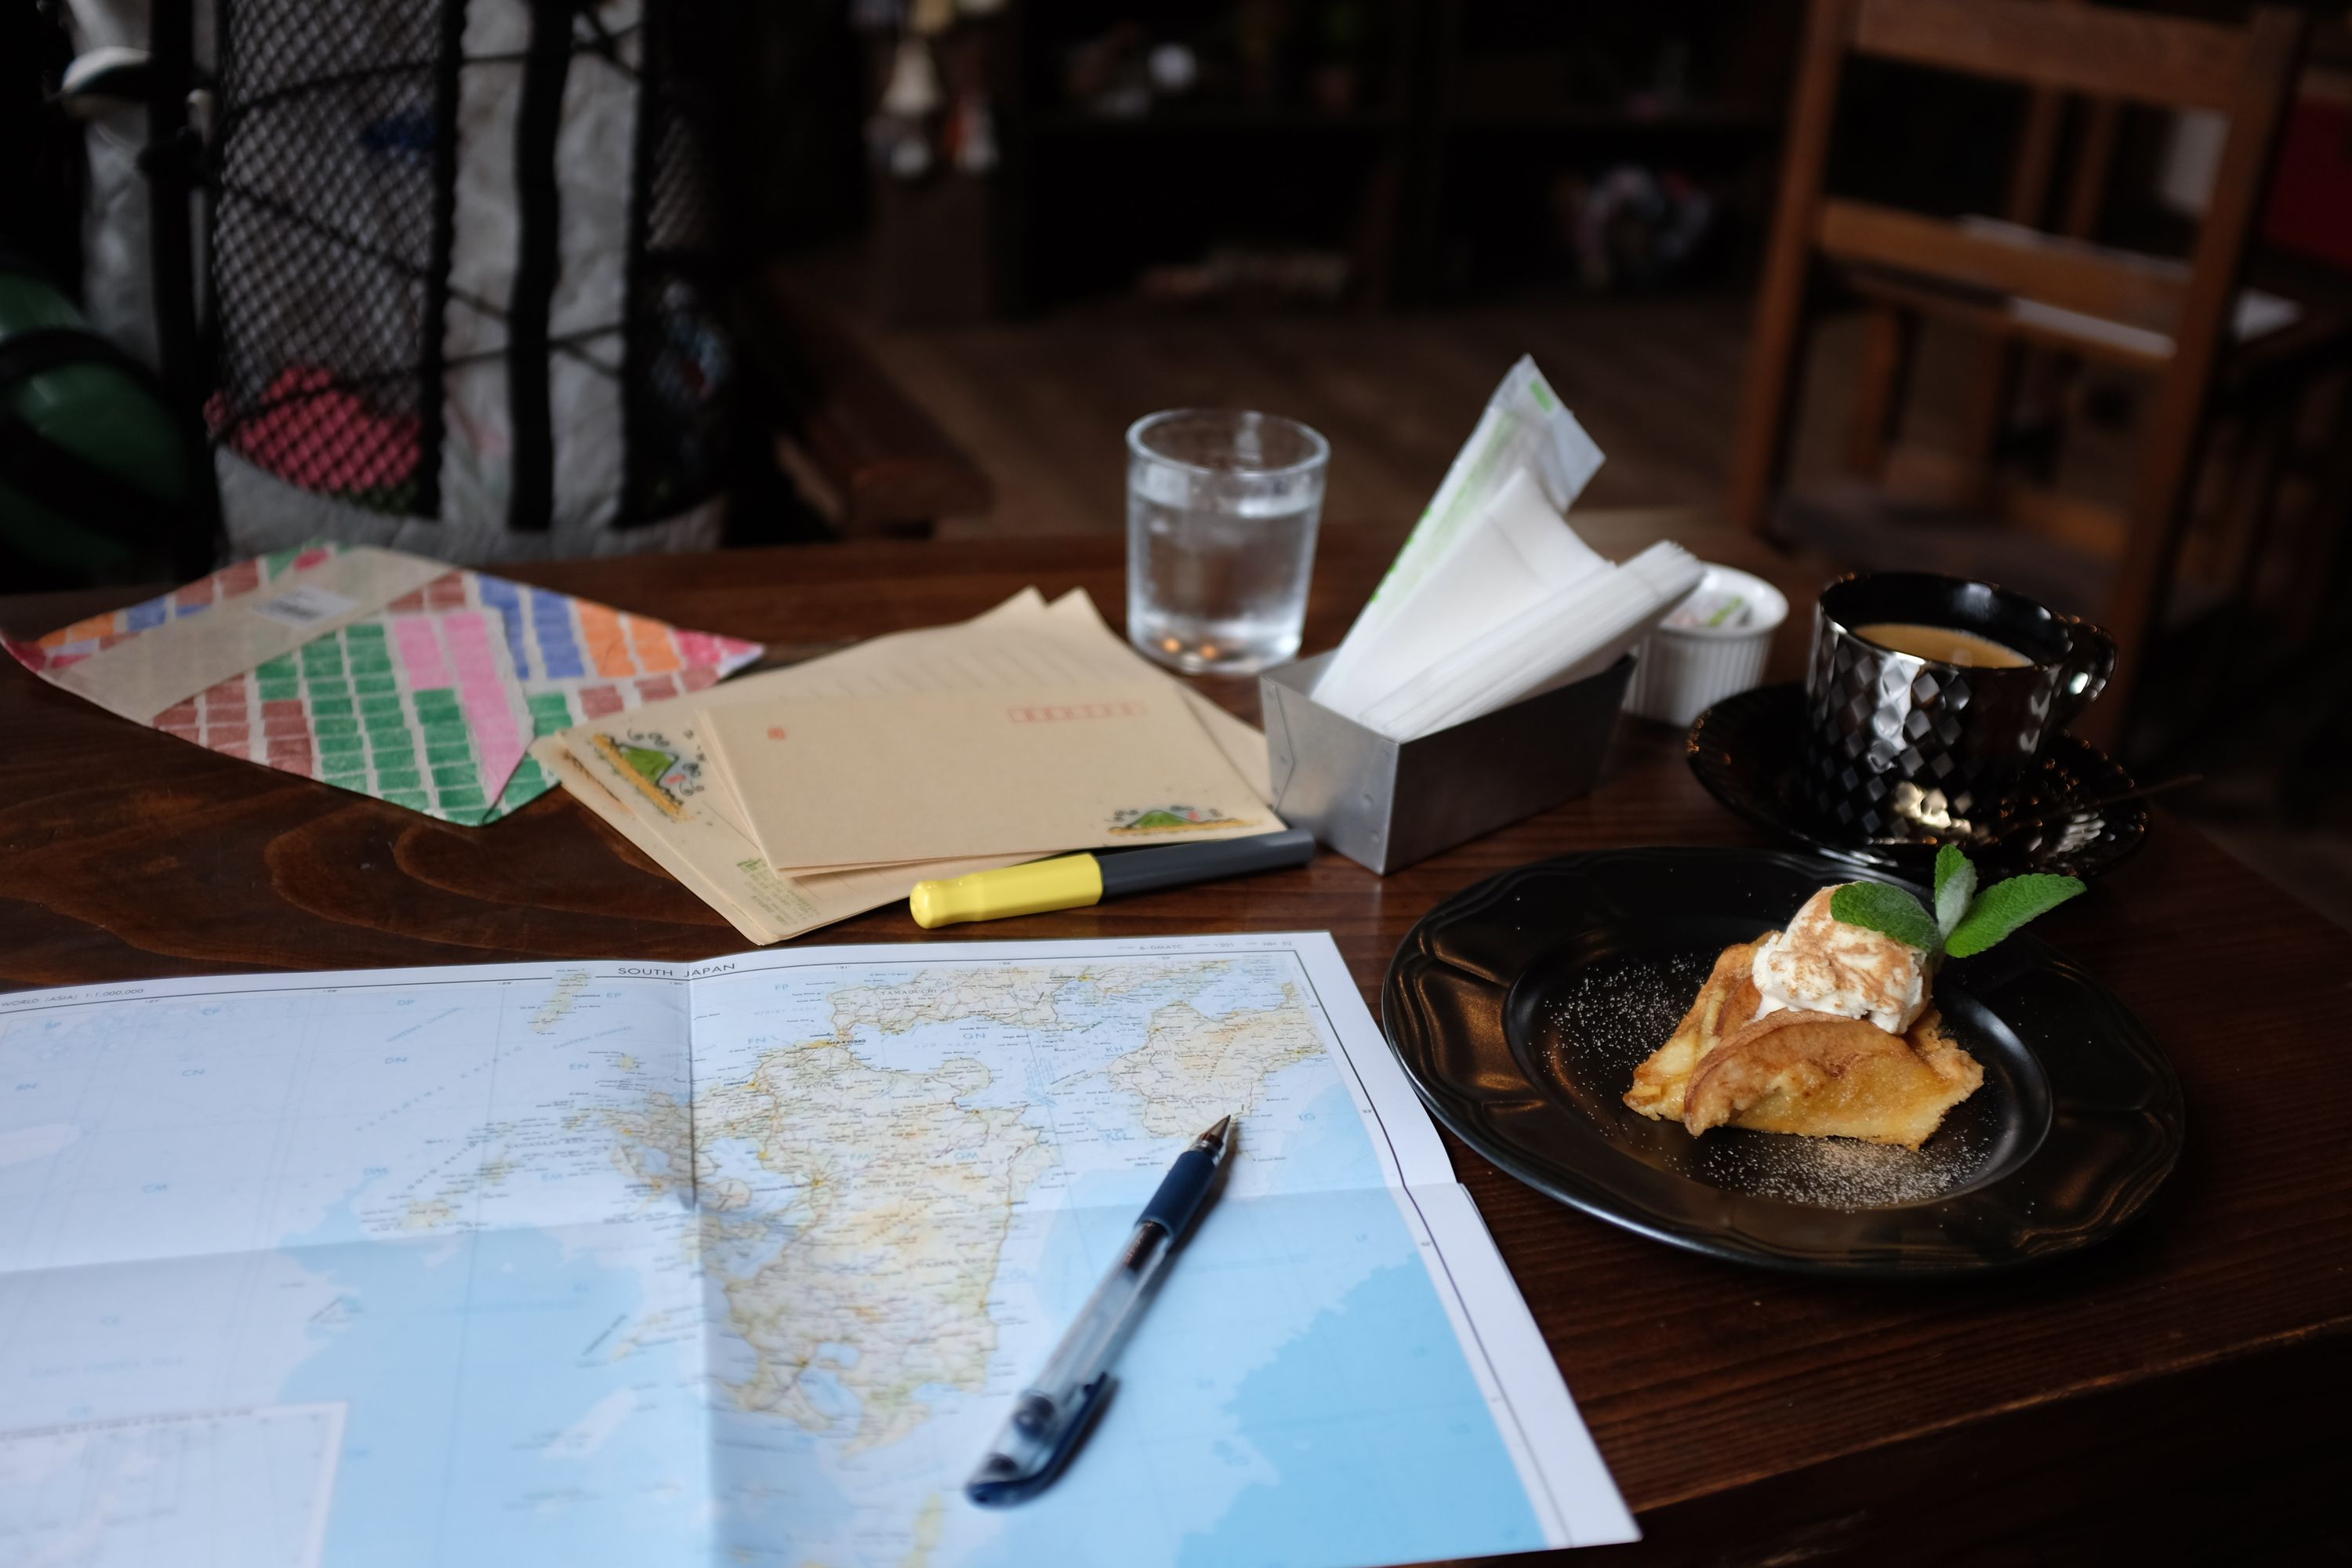 A map of Kyushu laid out on a coffee table, with some pens, envelopes, a cake, and a cup of coffee.